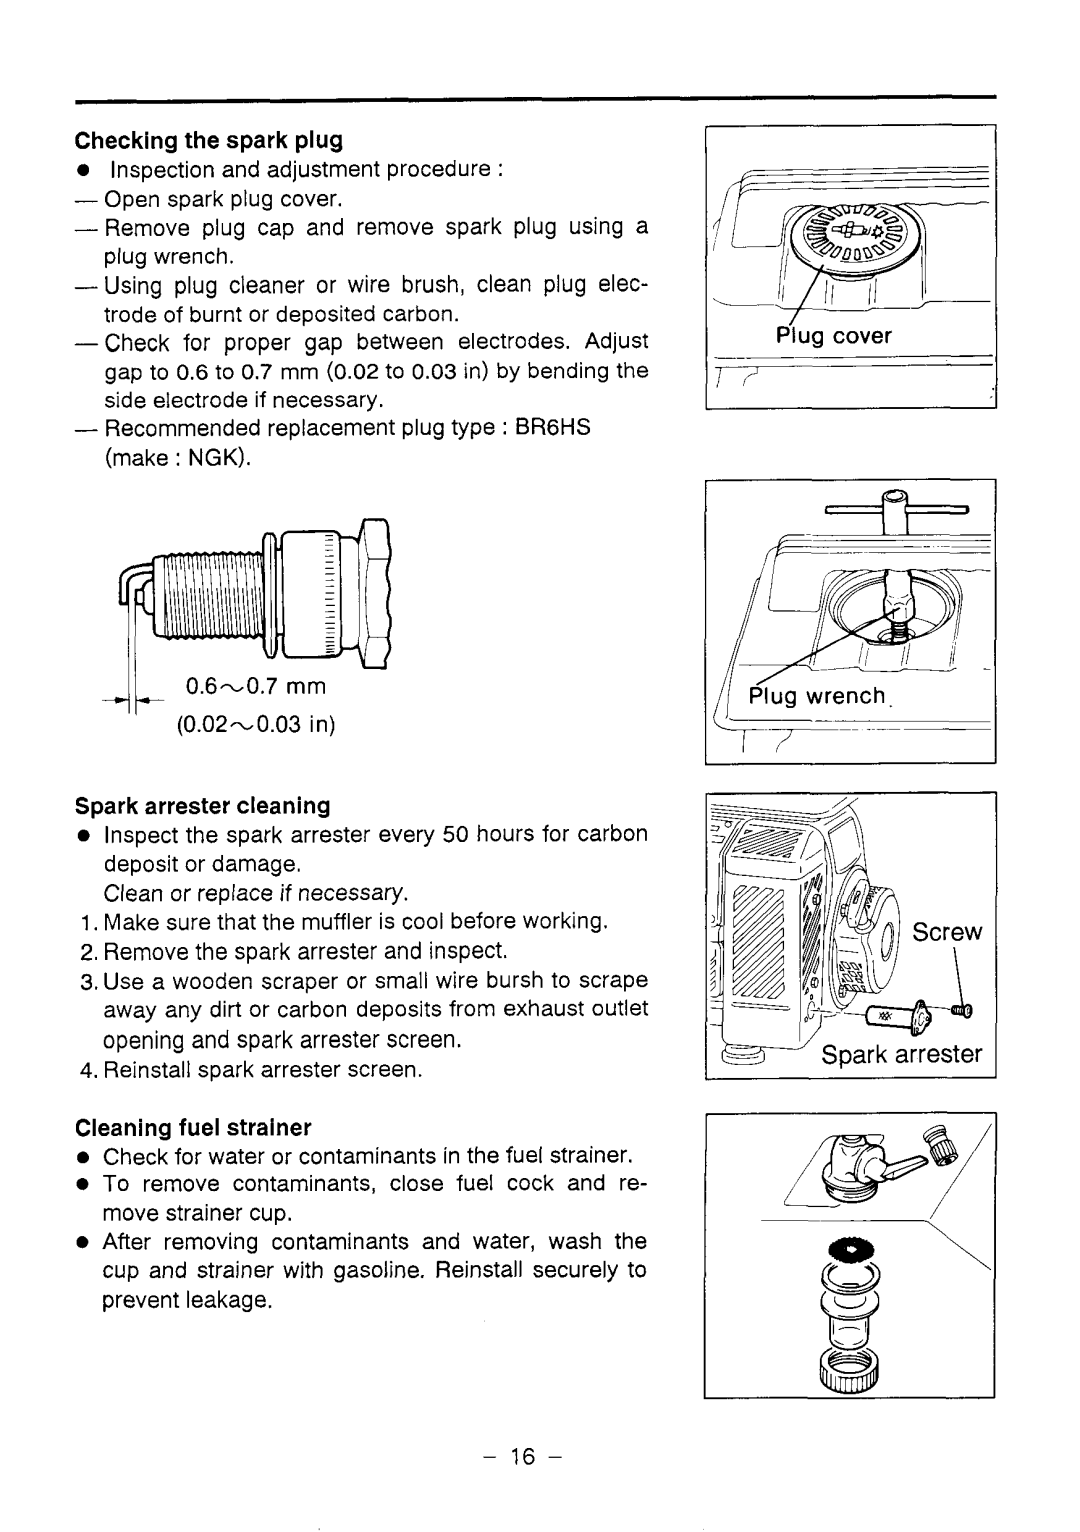 Makita G1200R instruction manual Checking the spark plug, Spark arrester cleaning, Cleaning fuel strainer 